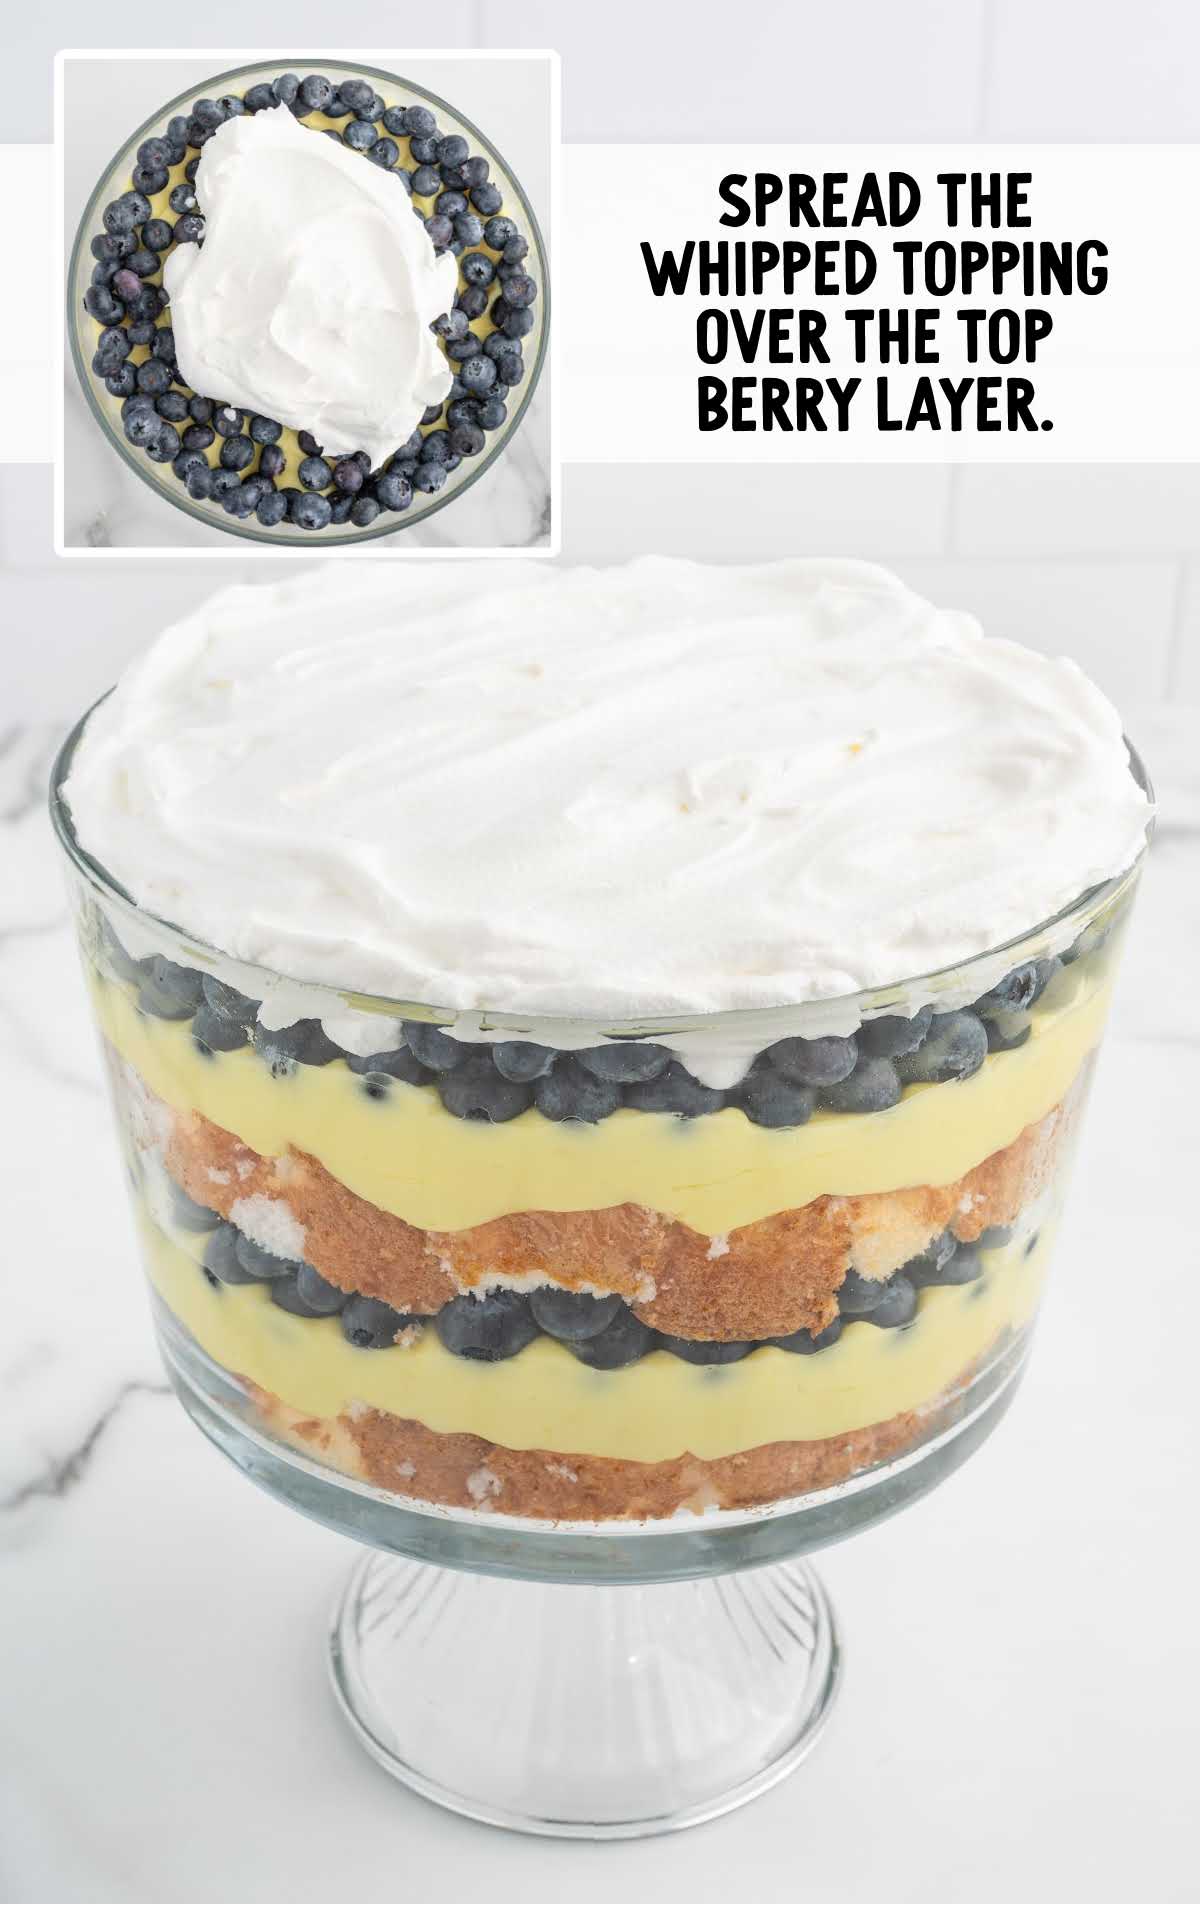 whipped topping added on the top of the berry layer